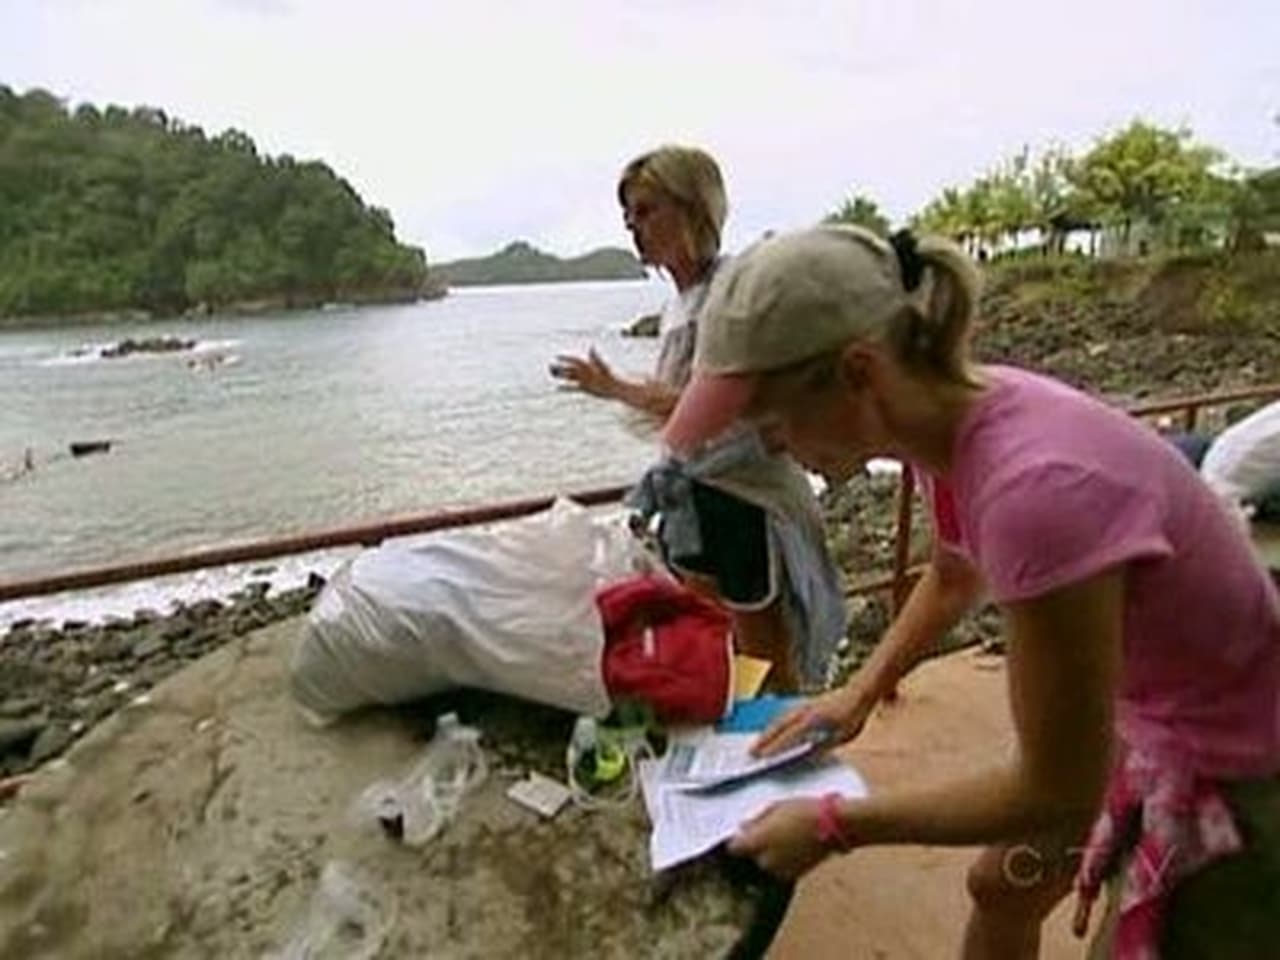 The Amazing Race - Season 8 Episode 7 : I Don't Roll with the Punches, I Punch / You Look Ridiculous